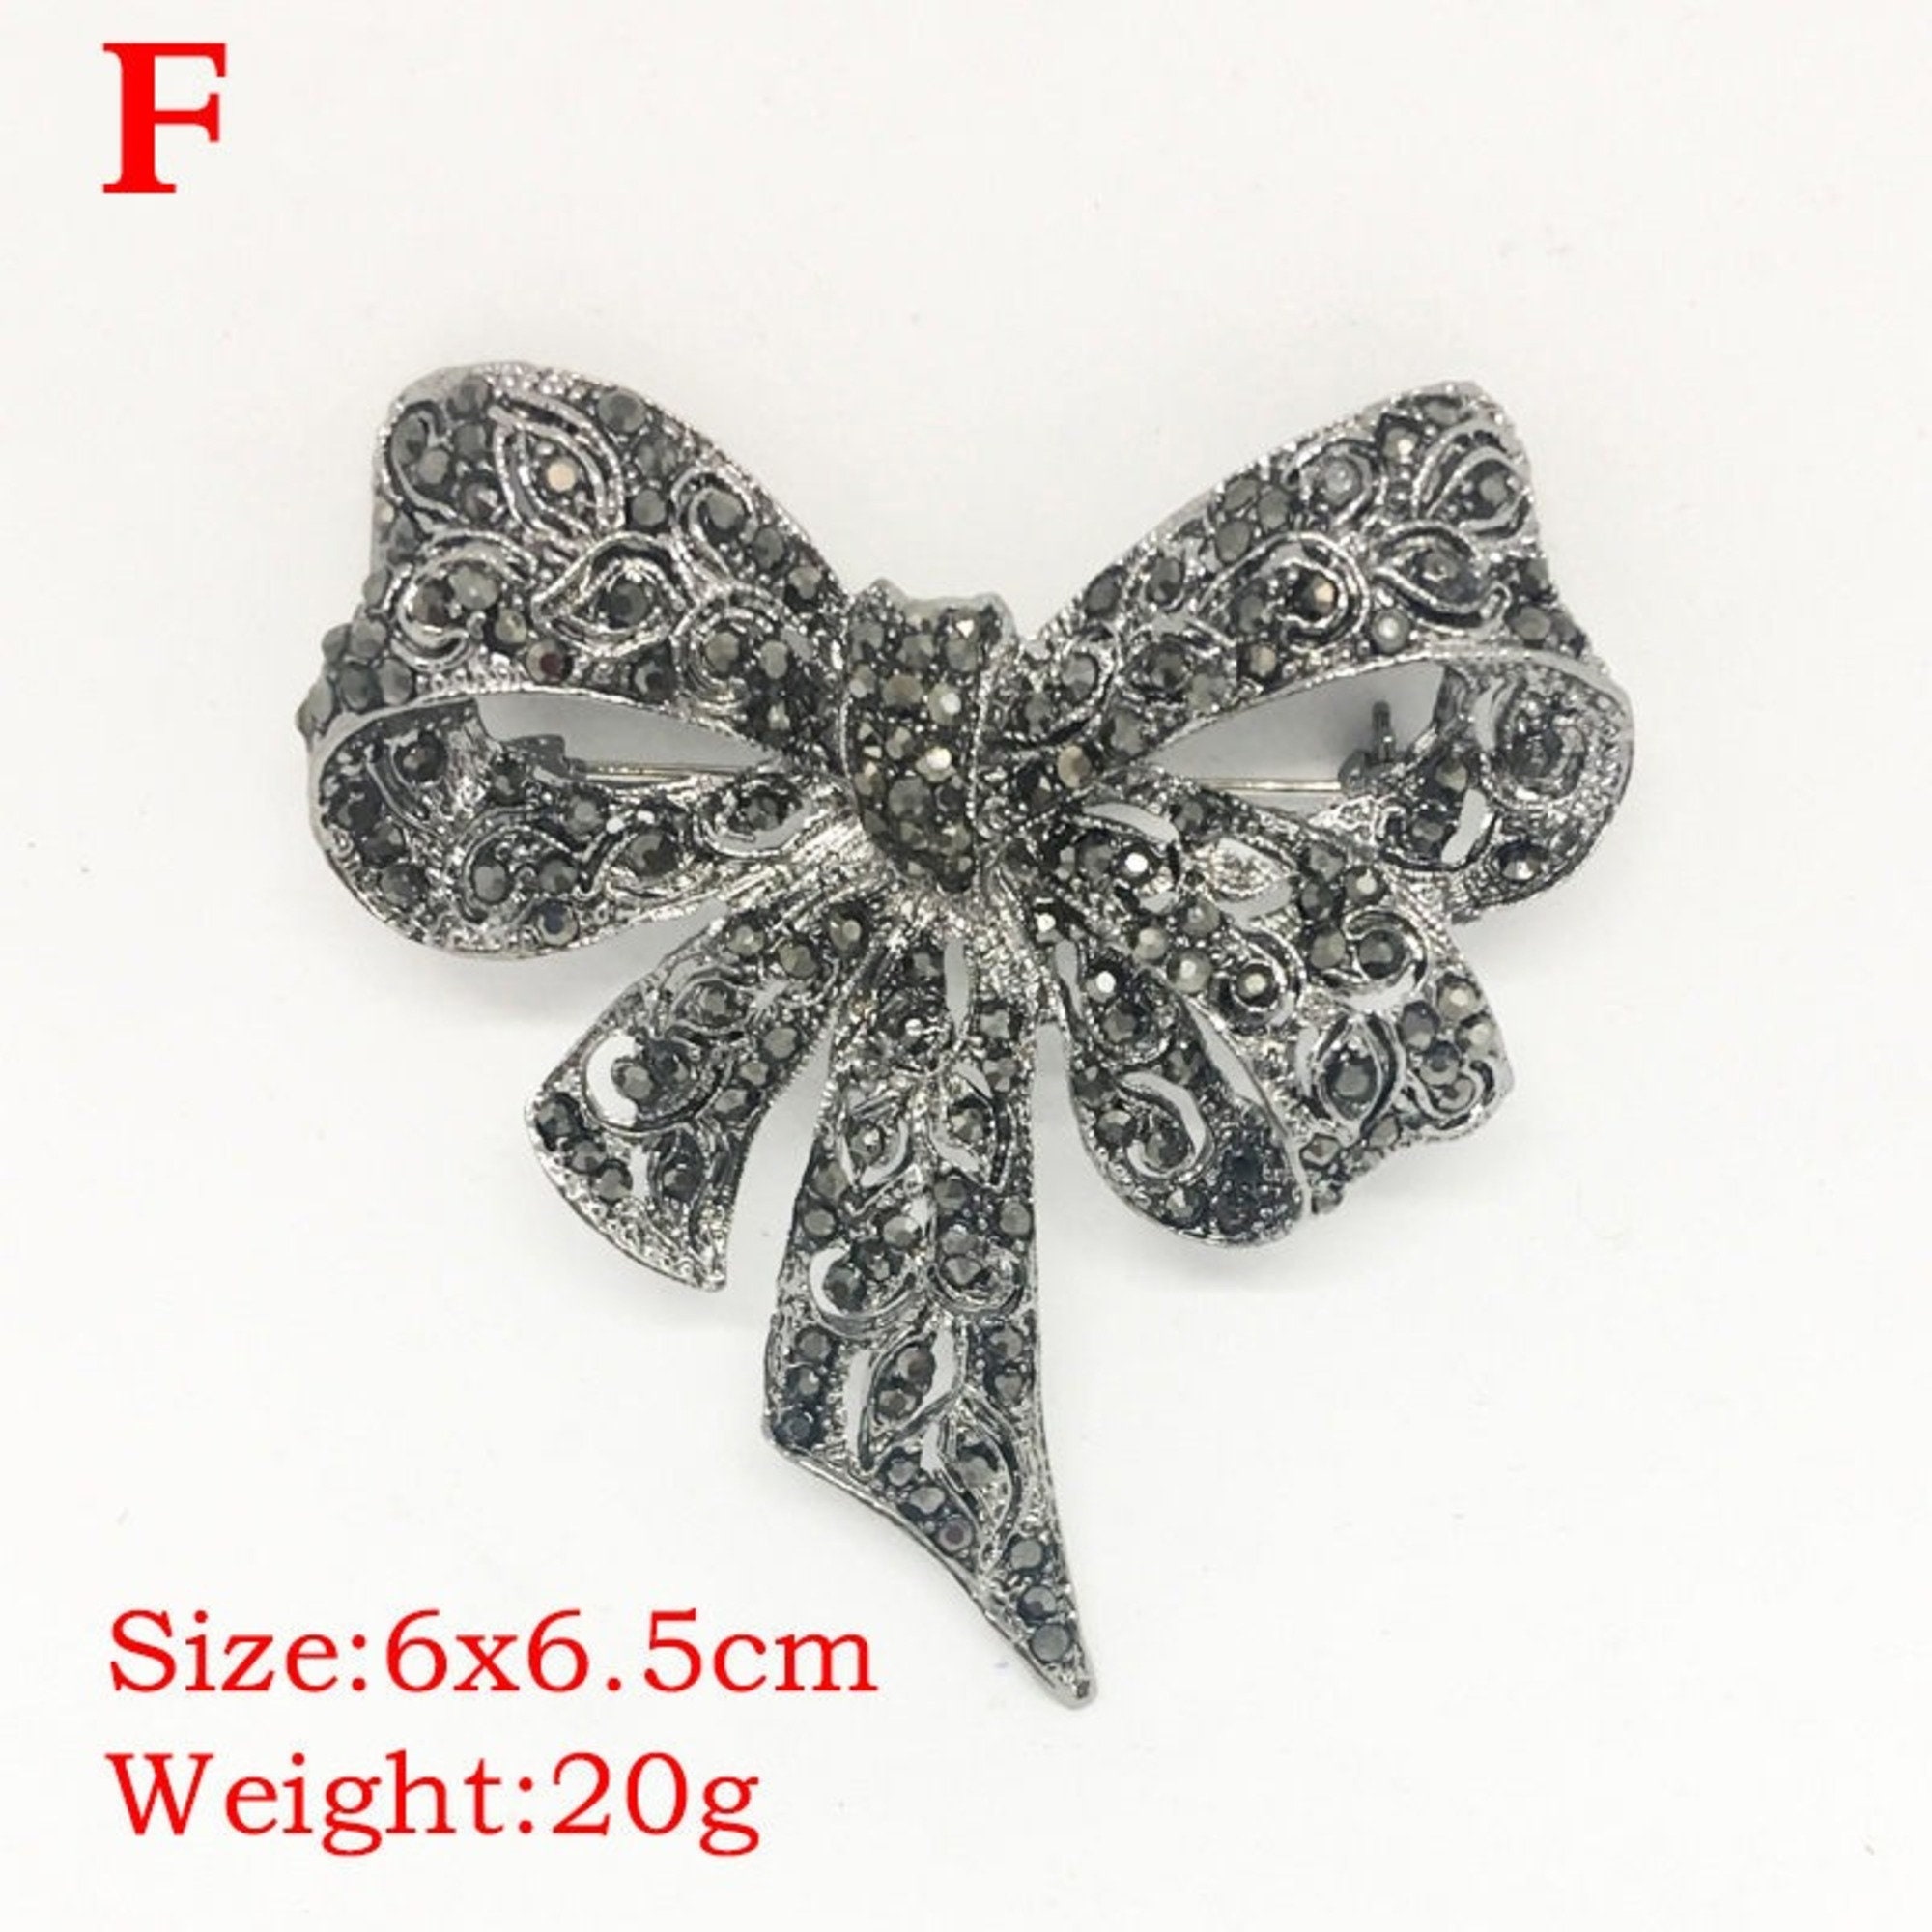 Rhinestone Black Flower Brooches for Women Vintage Antique Brooch Pin  Elegant Exquisite Brooches Gift